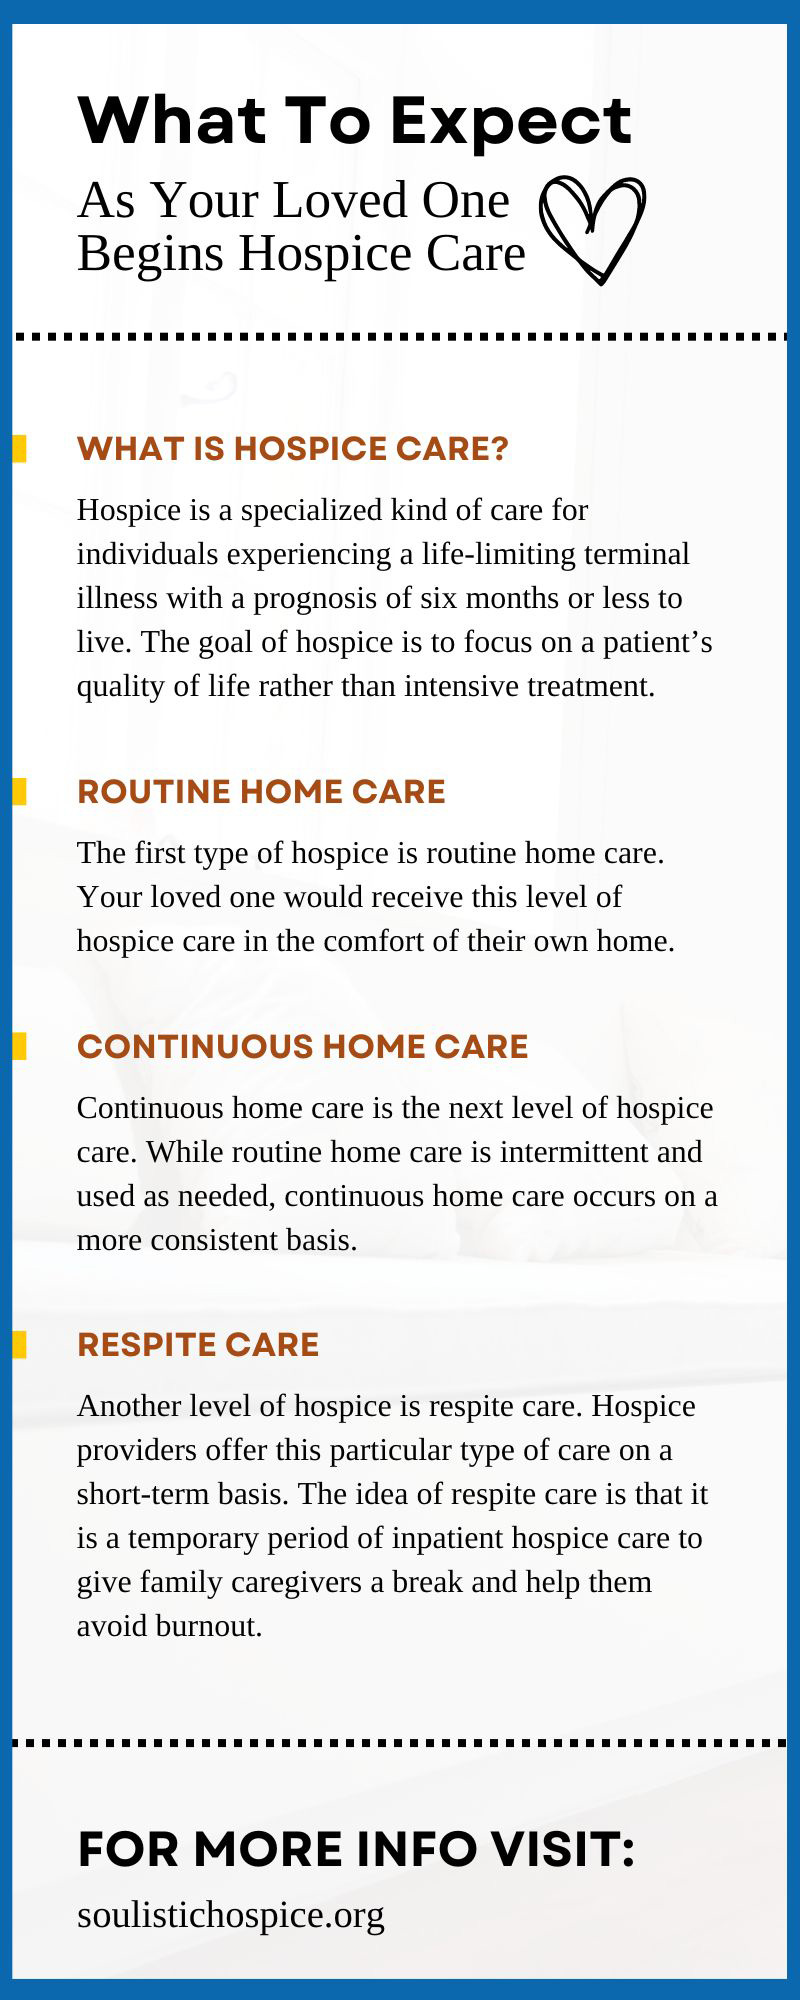 What To Expect As Your Loved One Begins Hospice Care